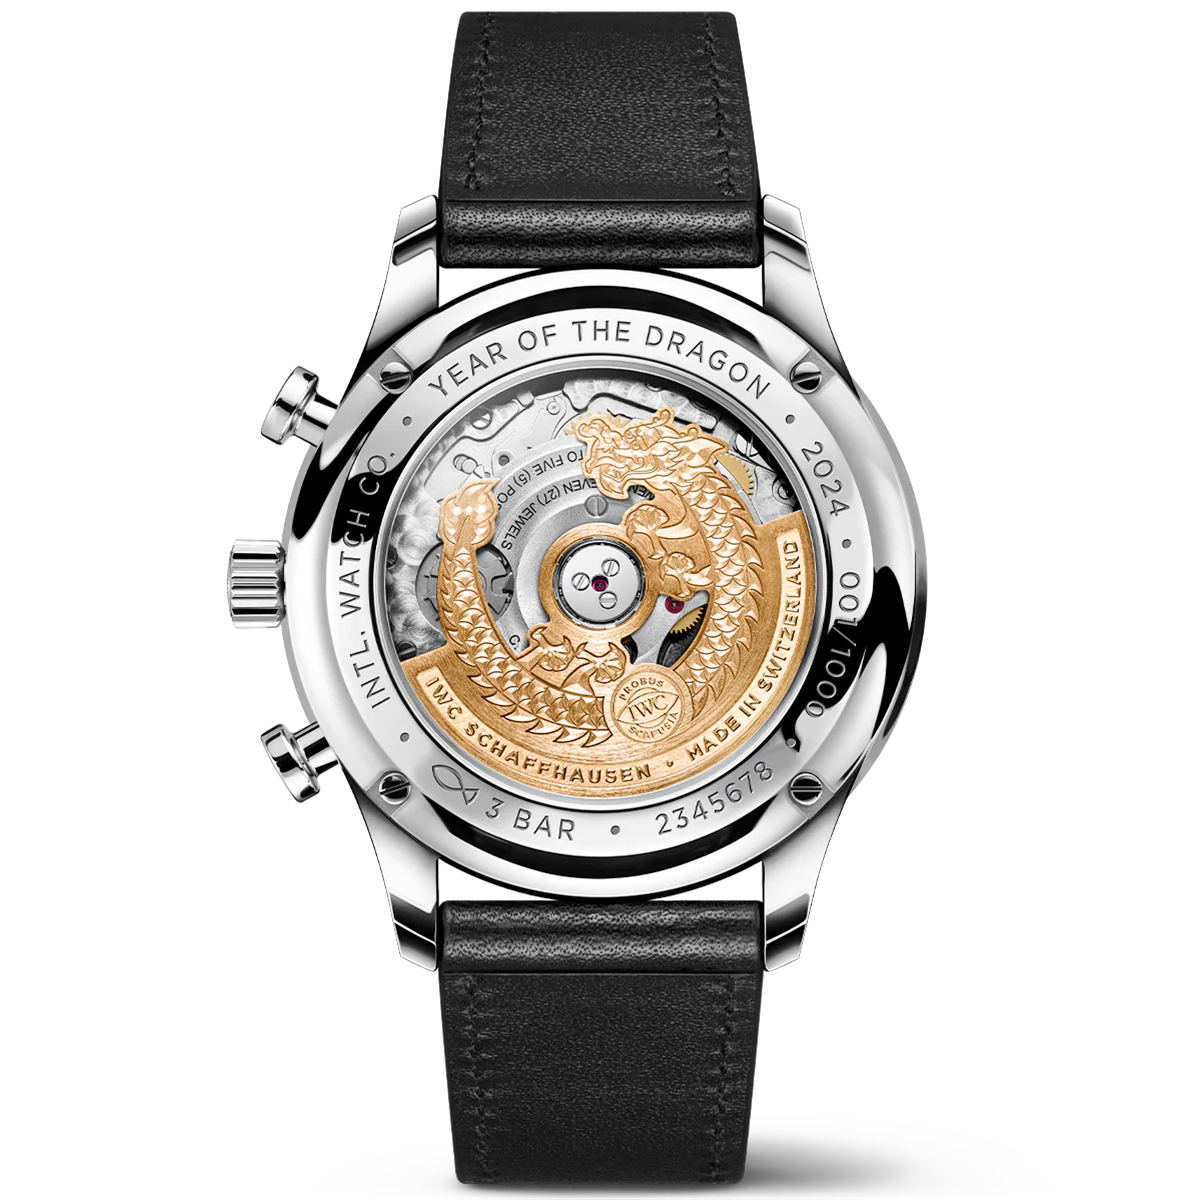 Portugieser 41mm "Year of the Dragon" Limited Edition Chronograph Watch